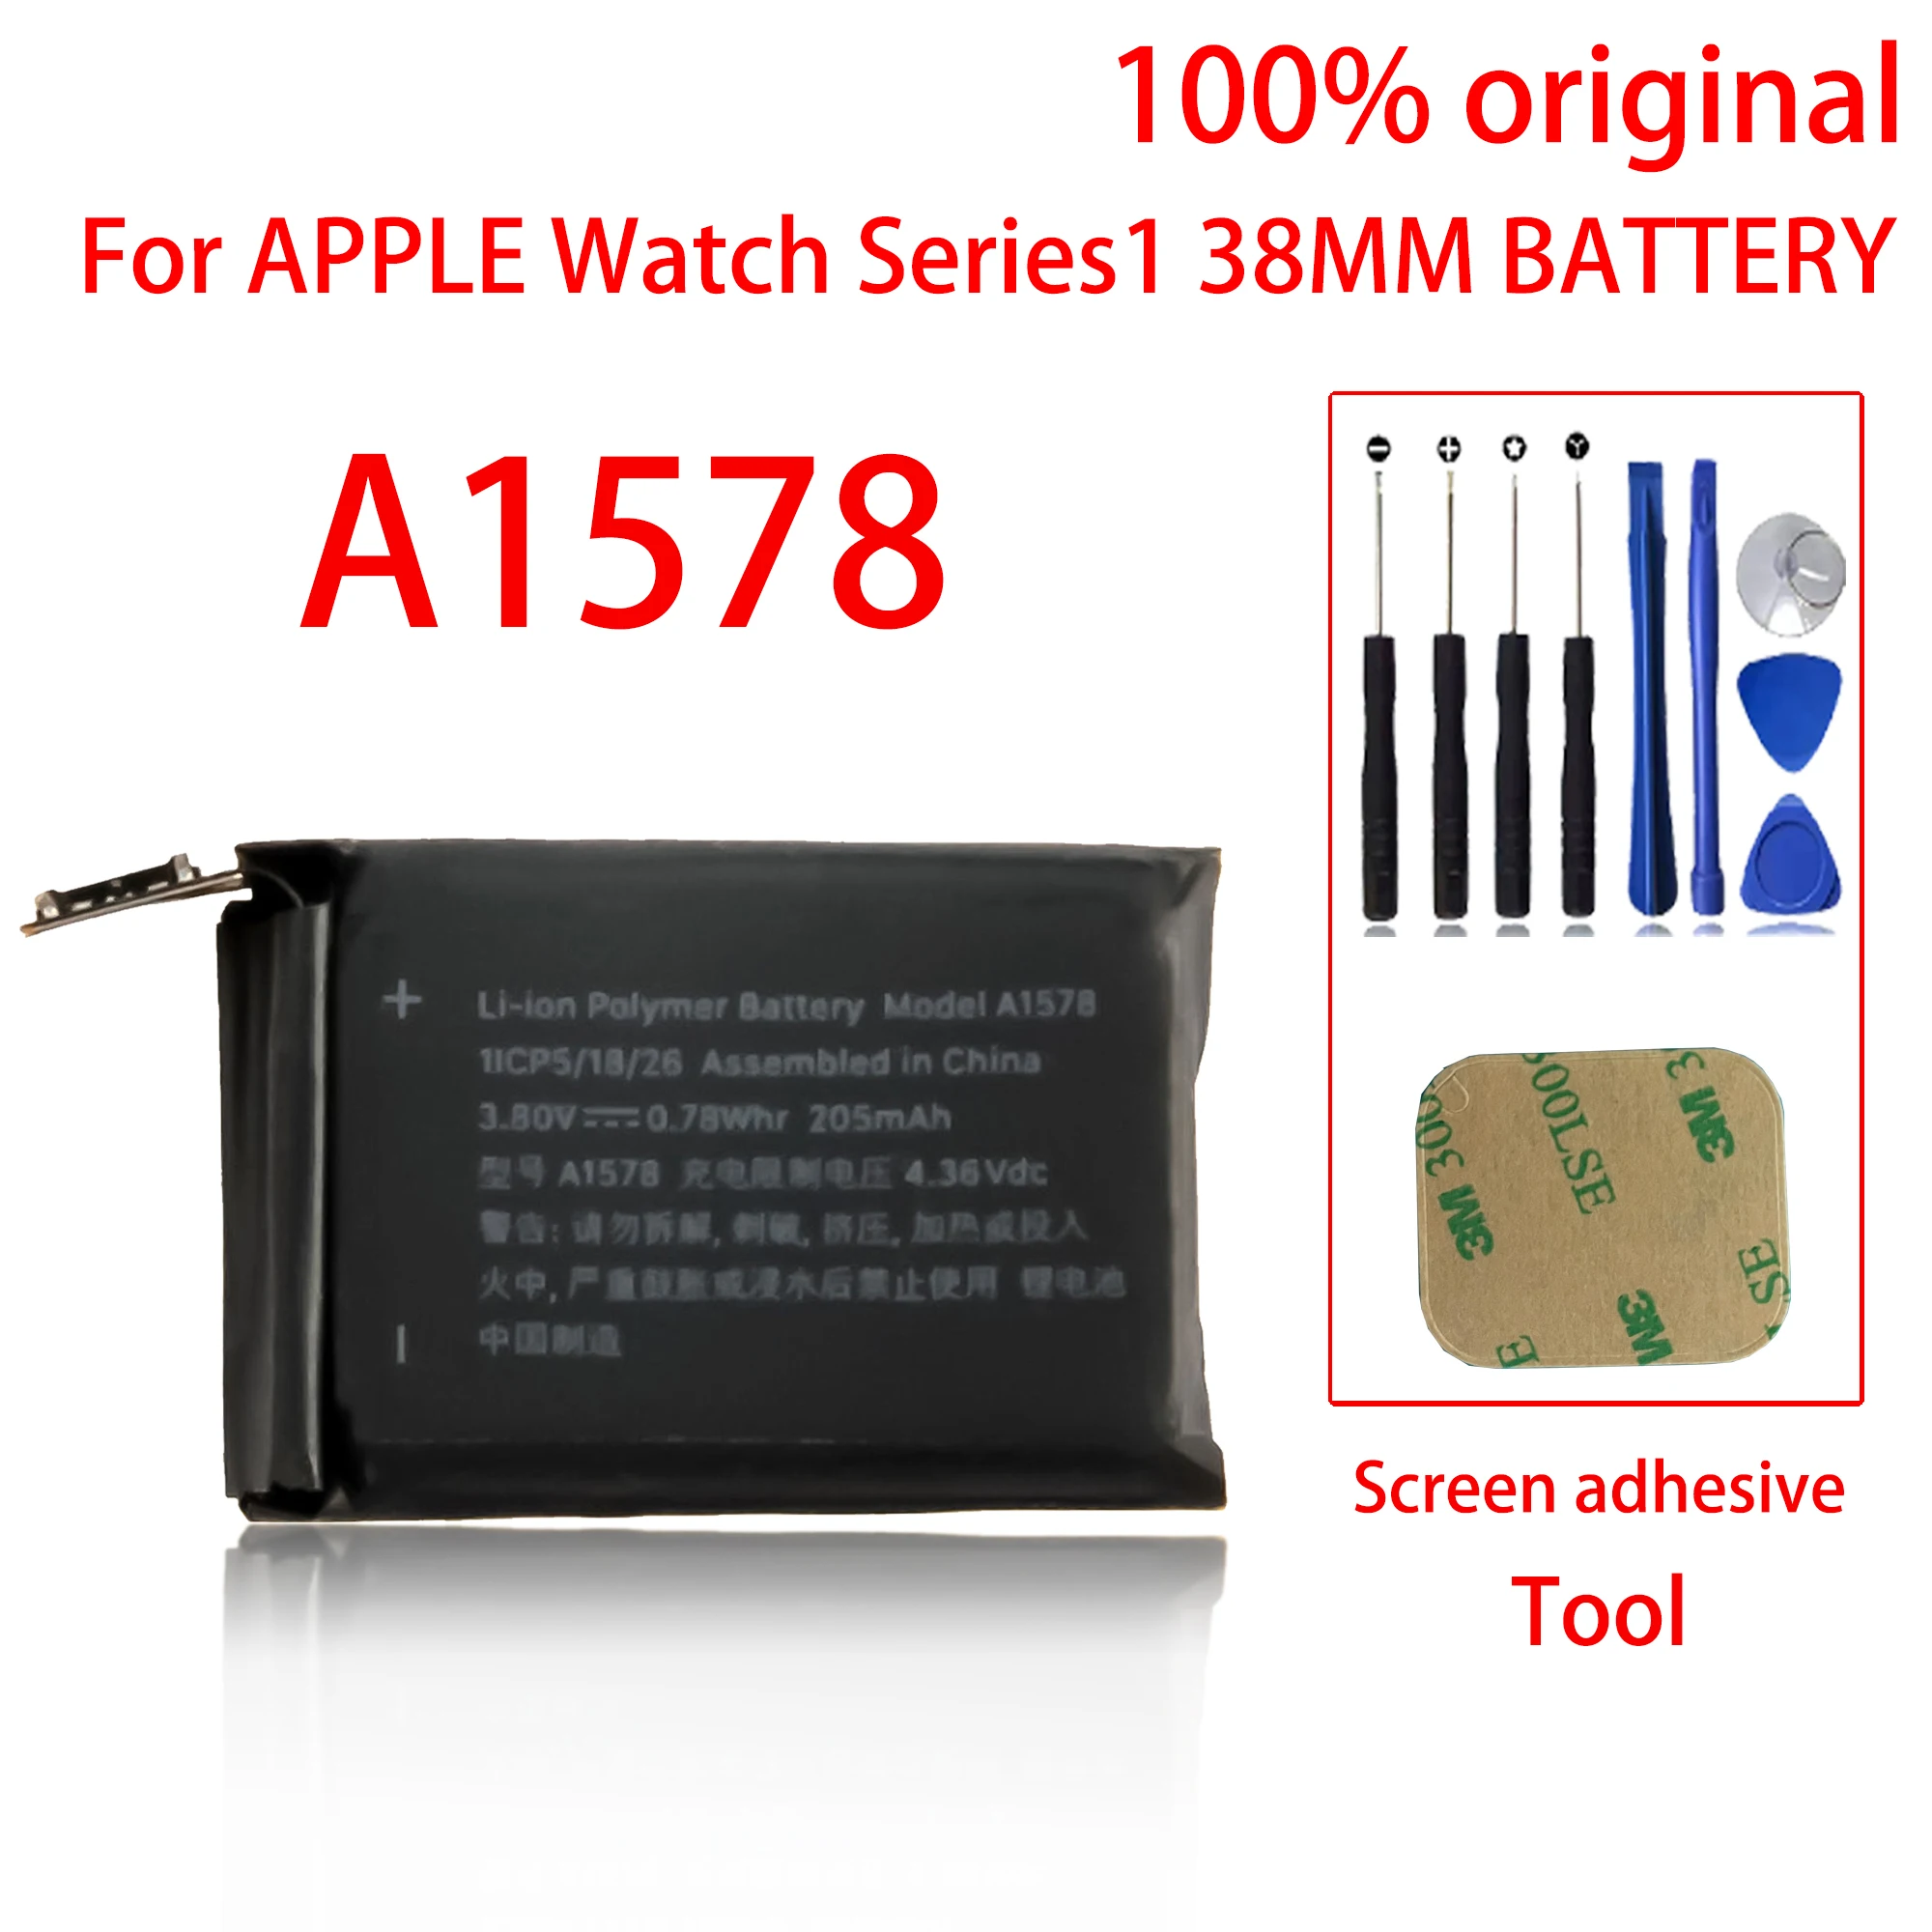 

100% Original 38mm Battery For Apple Watch Series 1 for Series 1 A1578, A1802, (1st Generation) A1553 Batteries Bateria